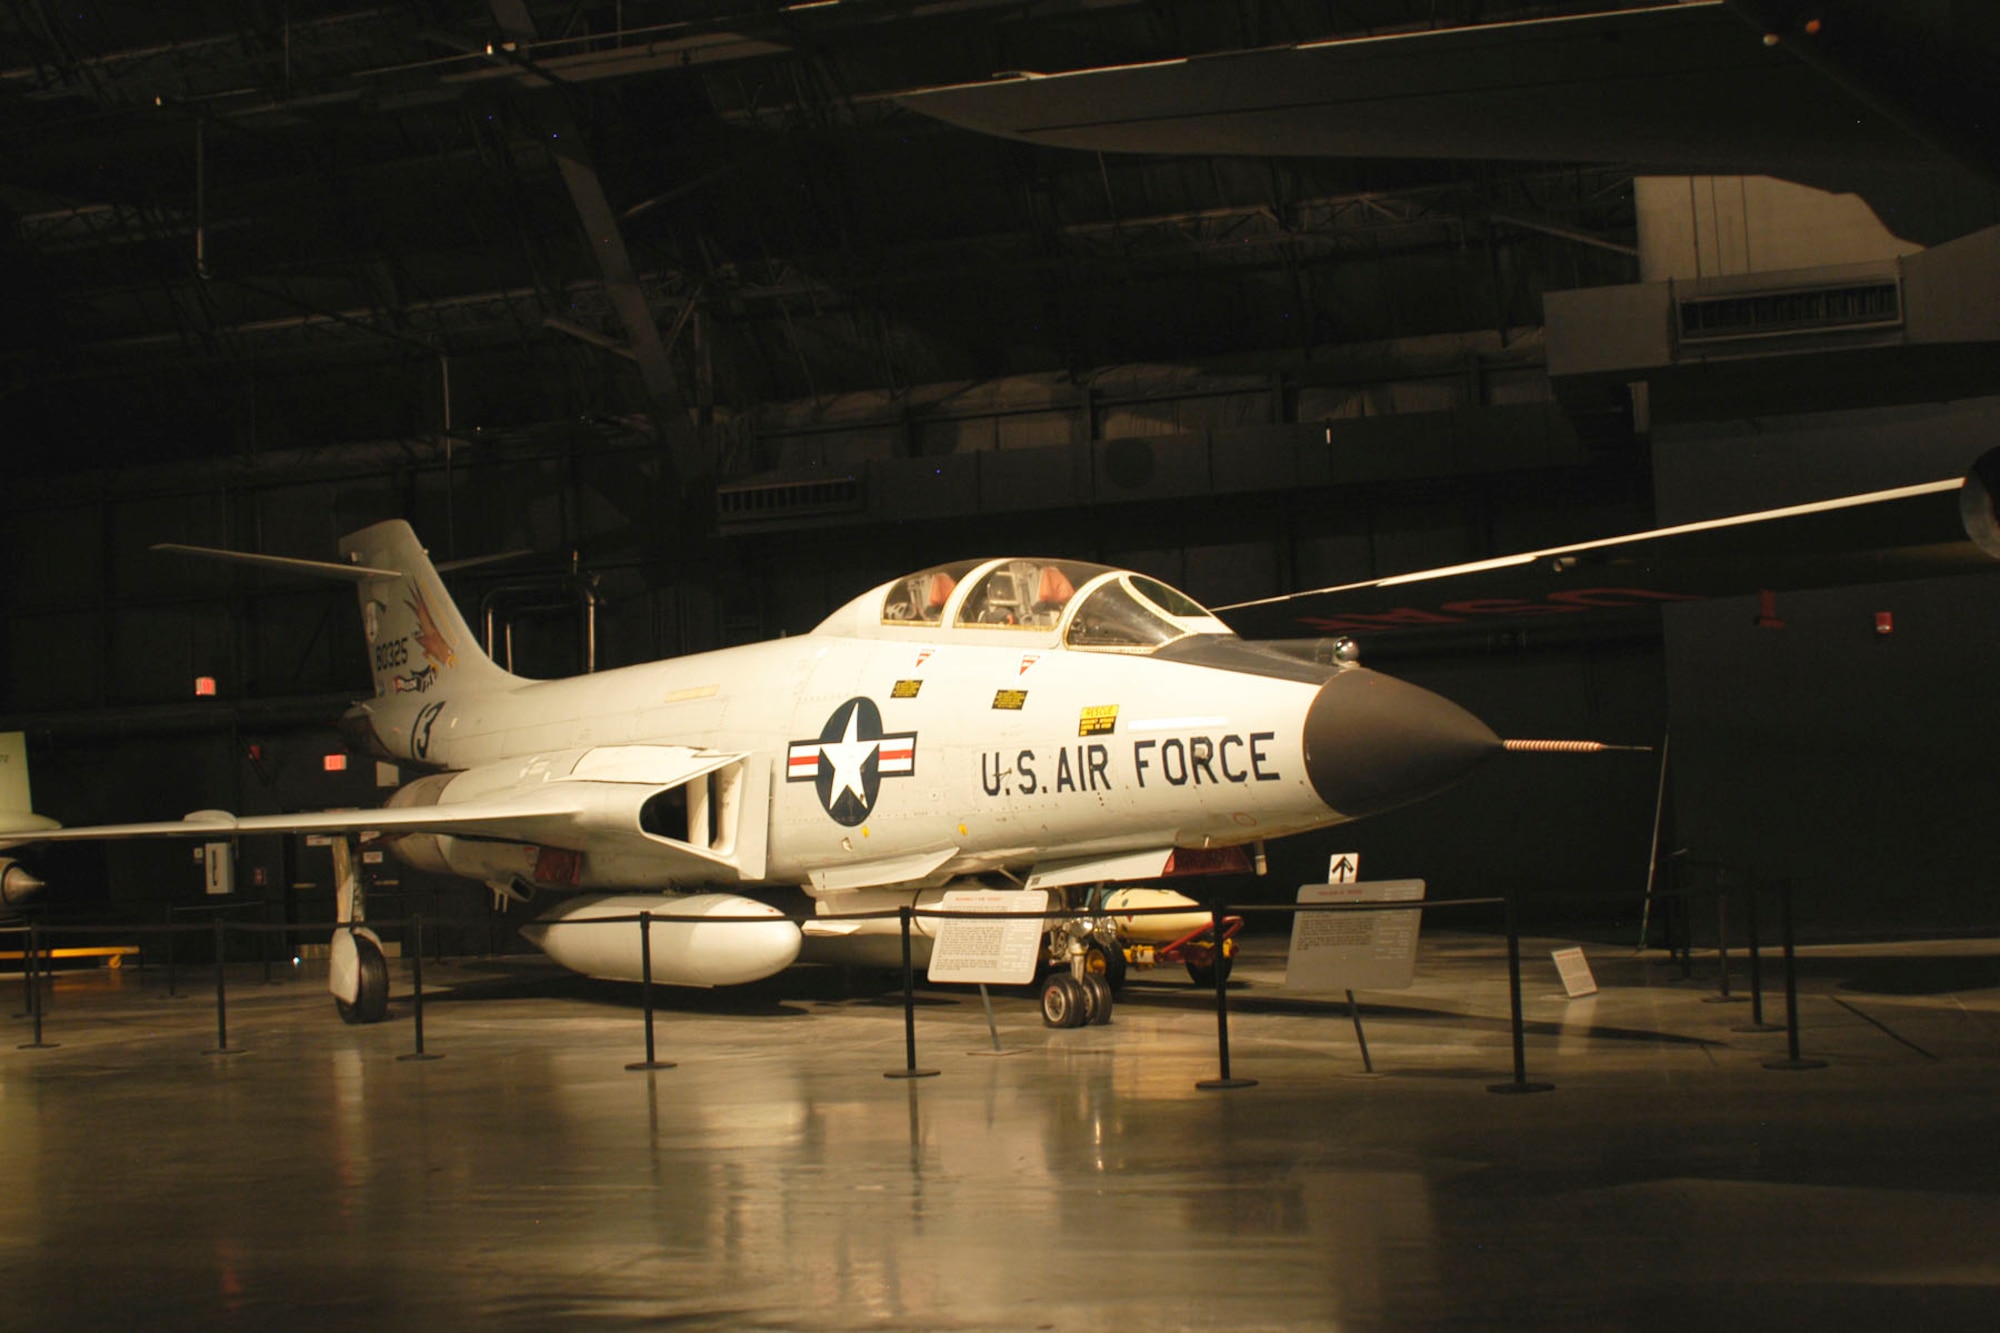 DAYTON, Ohio -- McDonnell F-101B Voodoo in the Cold War Gallery at the National Museum of the United States Air Force. (U.S. Air Force photo) 